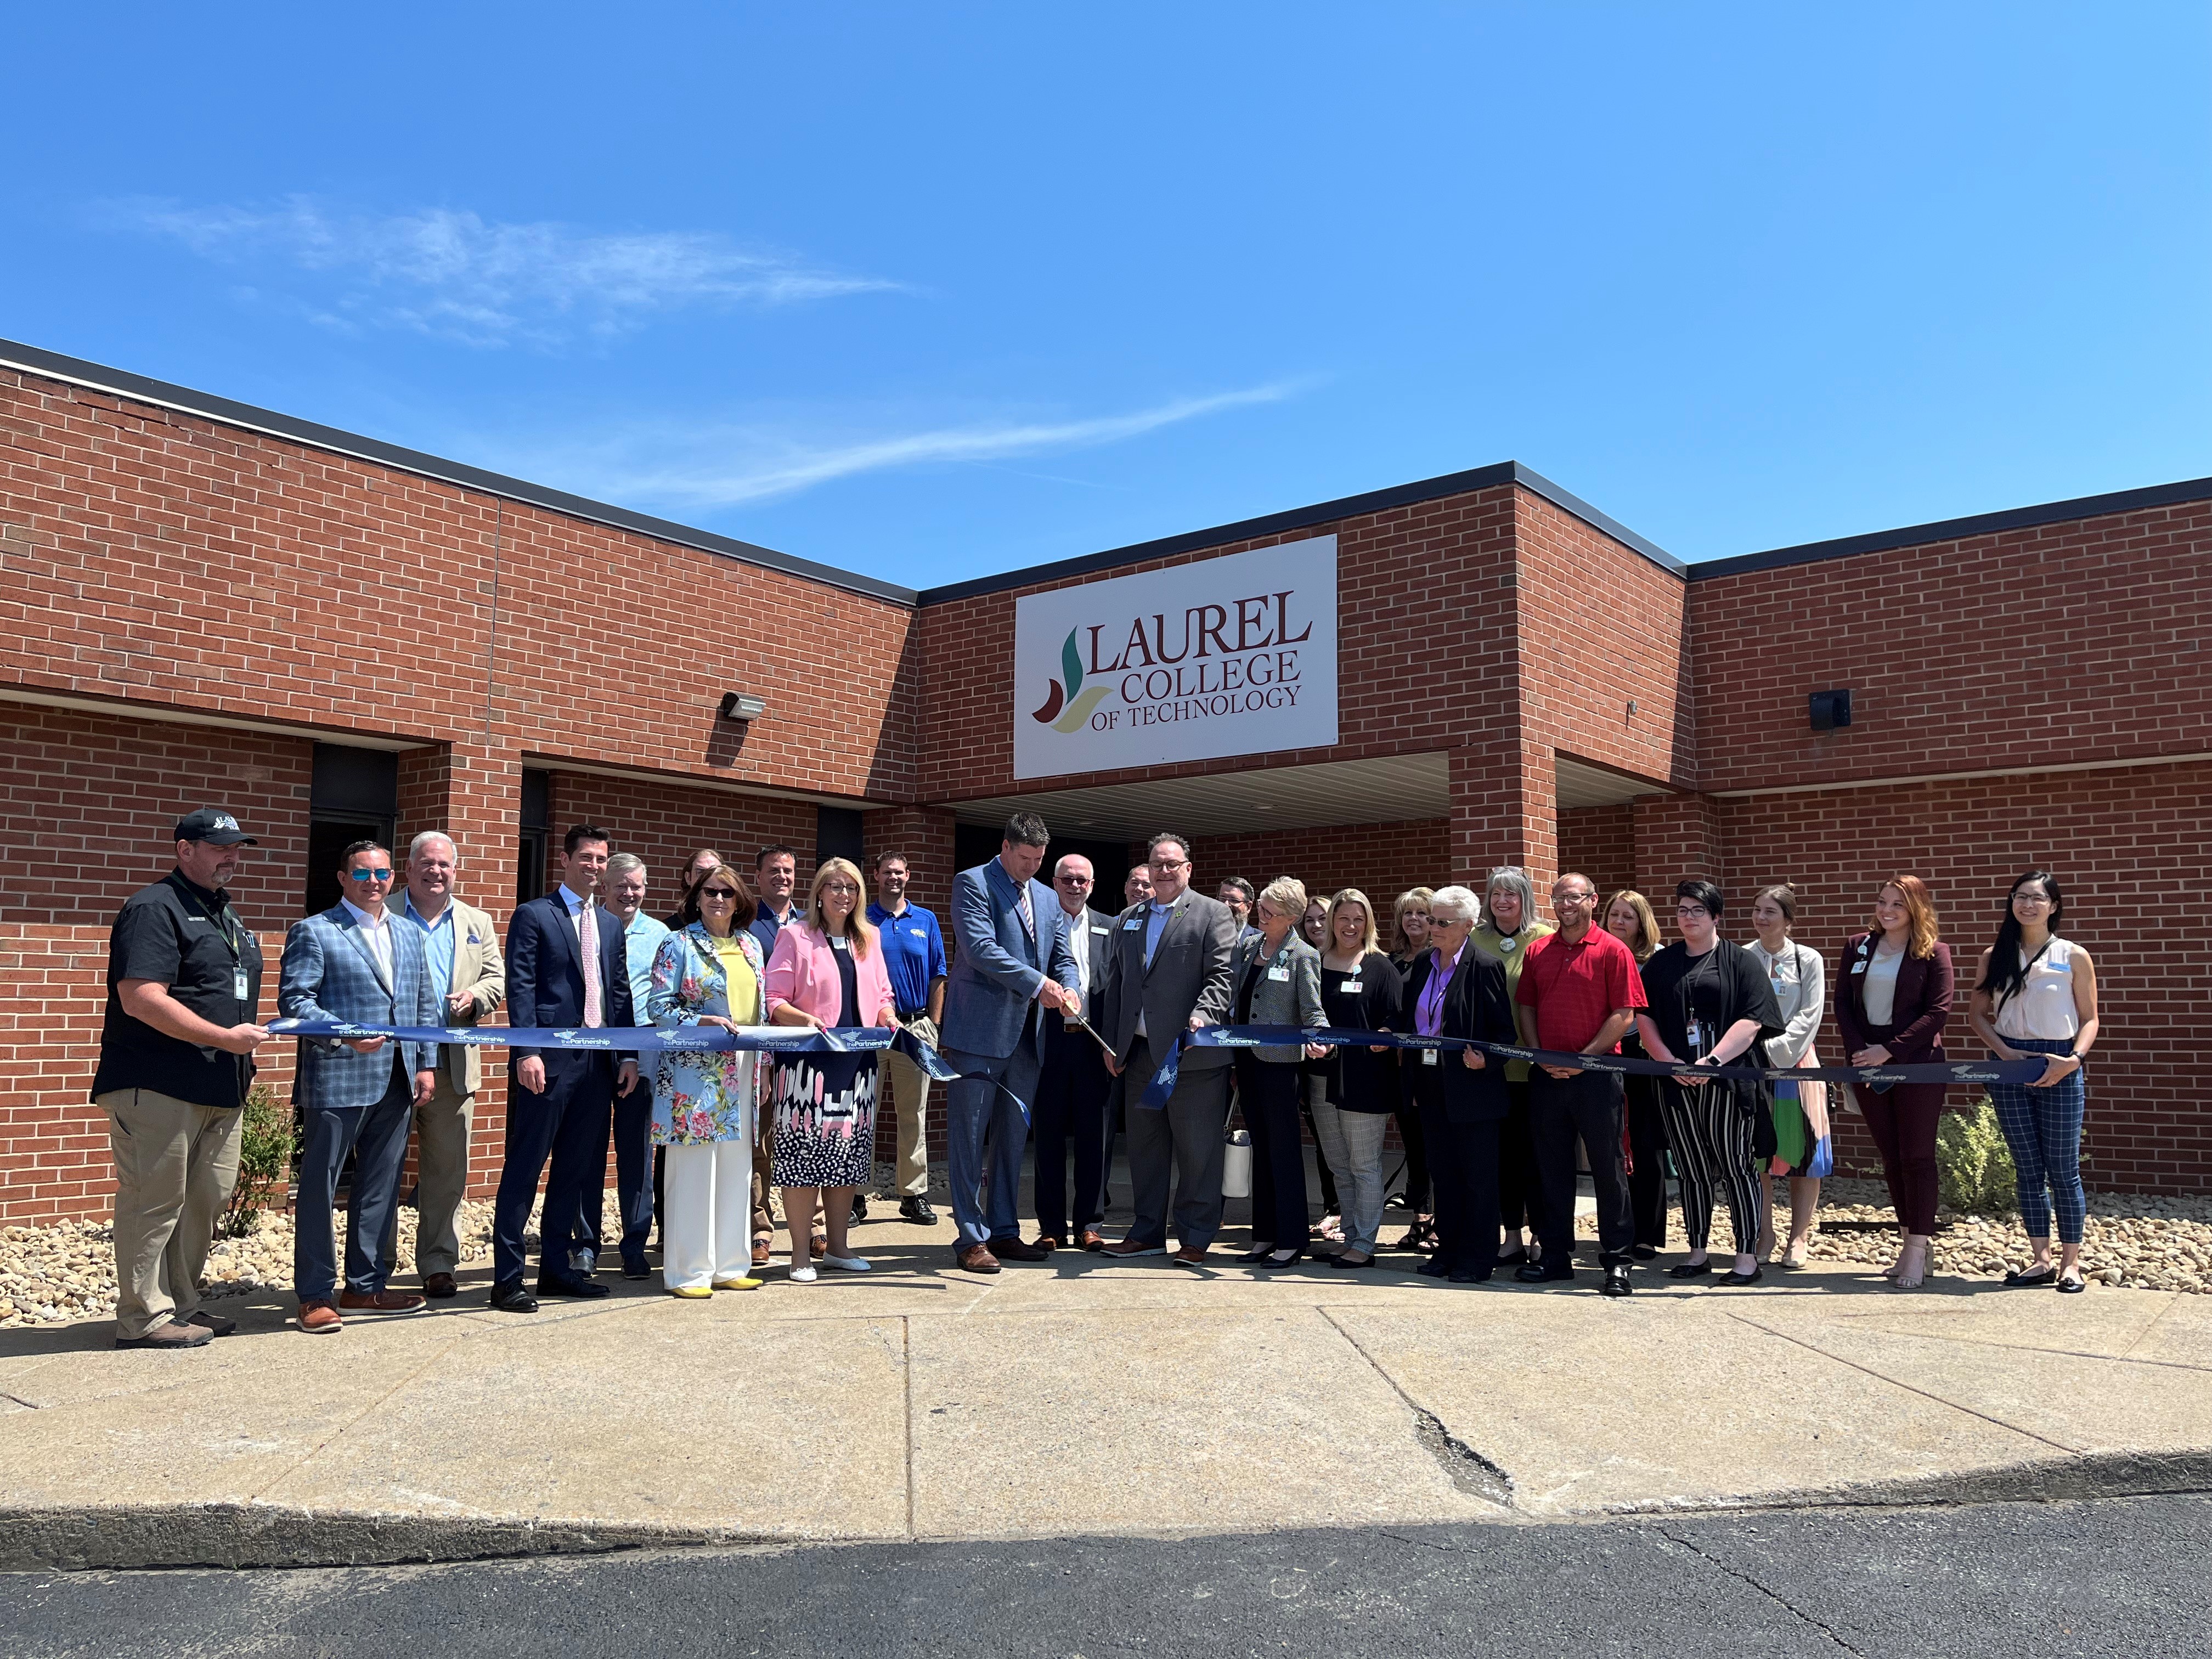 Laurel College of Technology Cuts Ribbon for New Campus in Morgantown